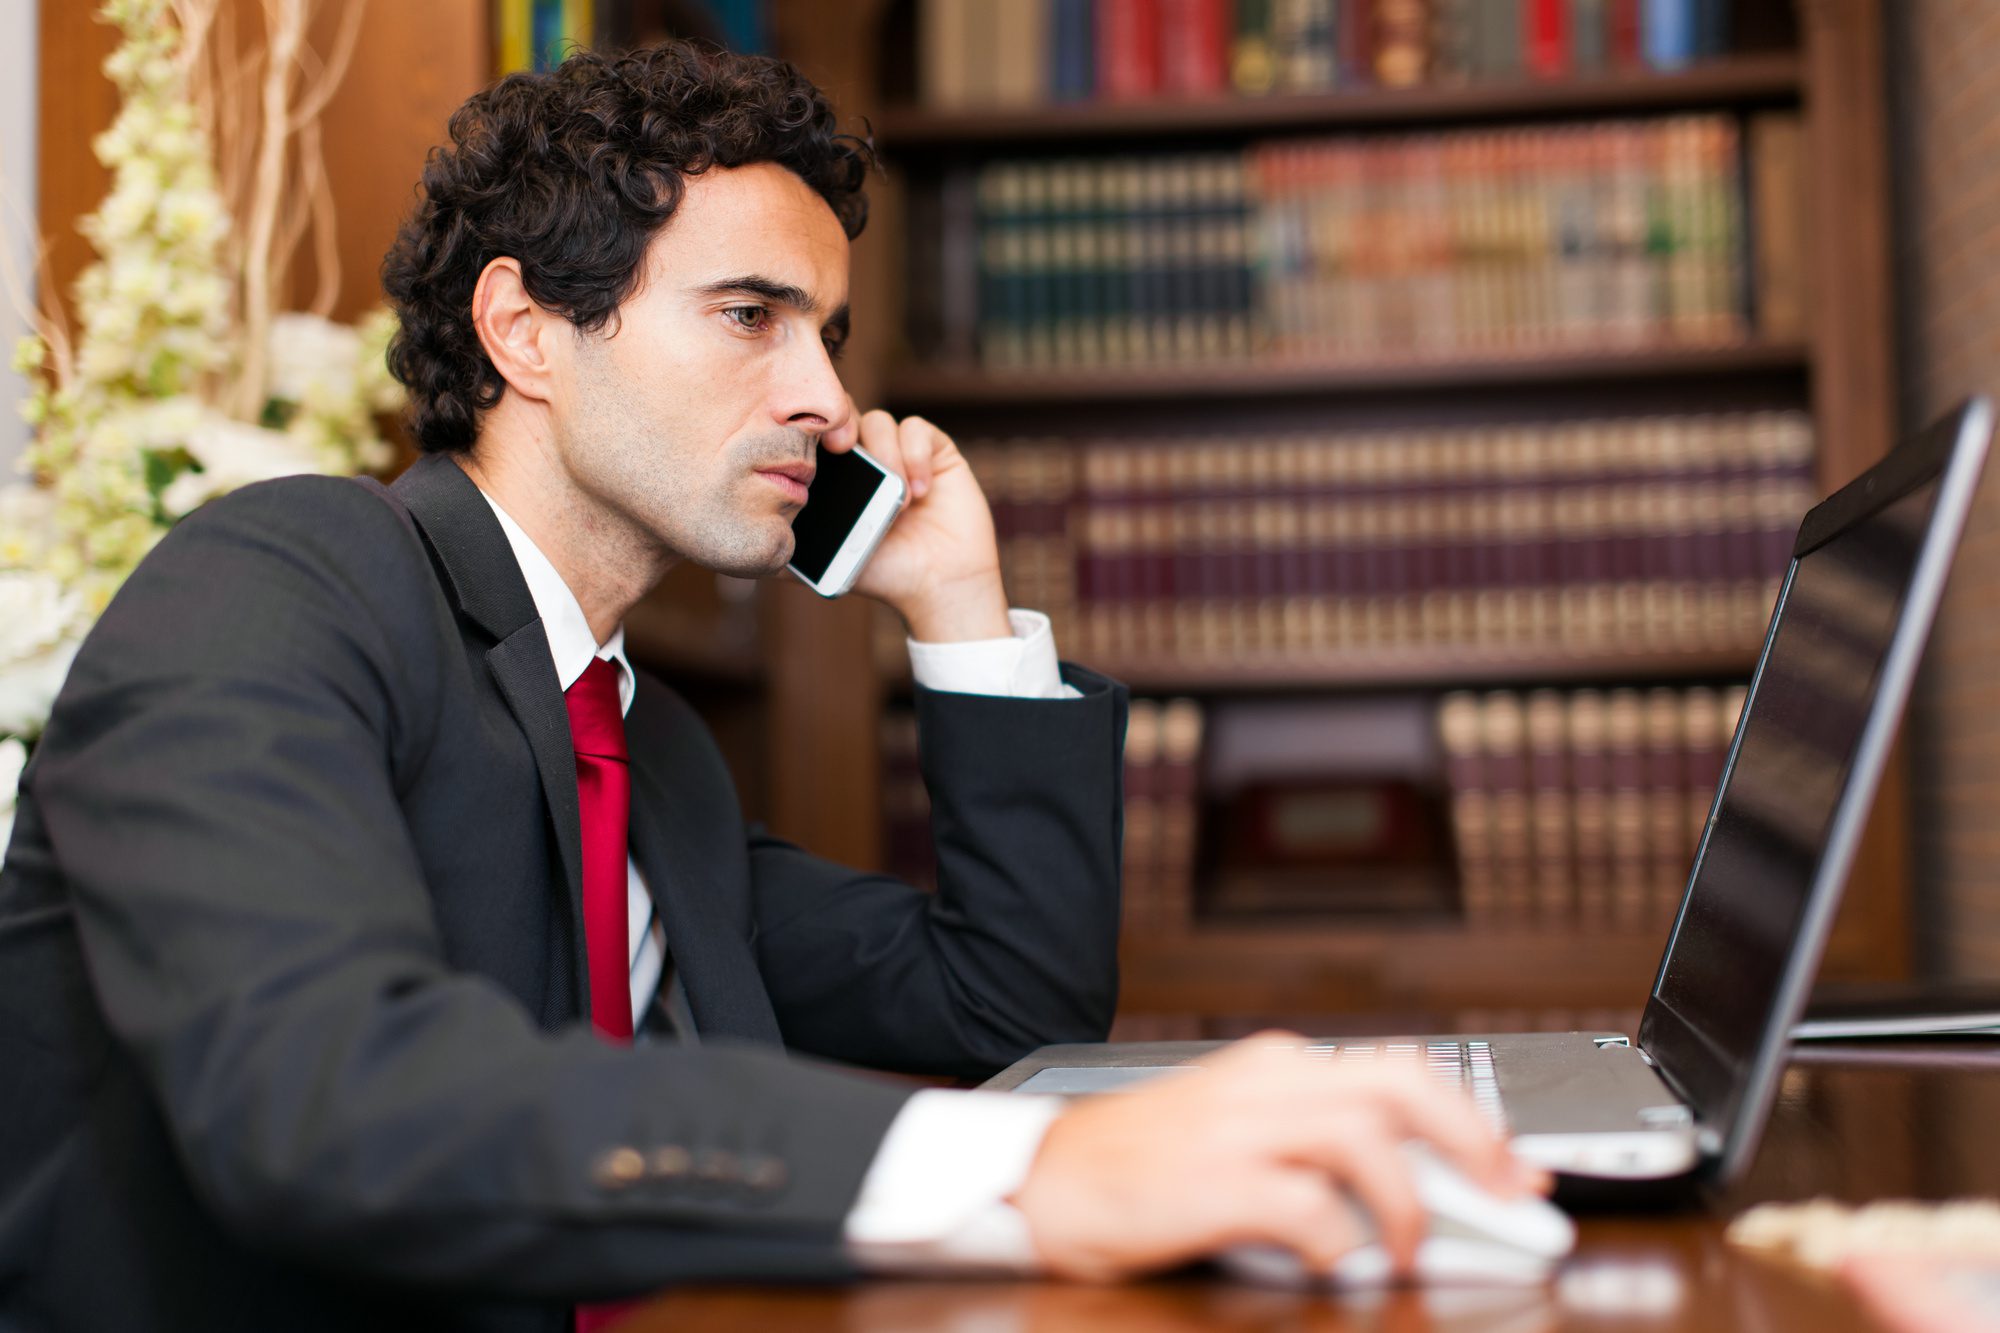 How to Hire an Attorney for a Criminal Defense